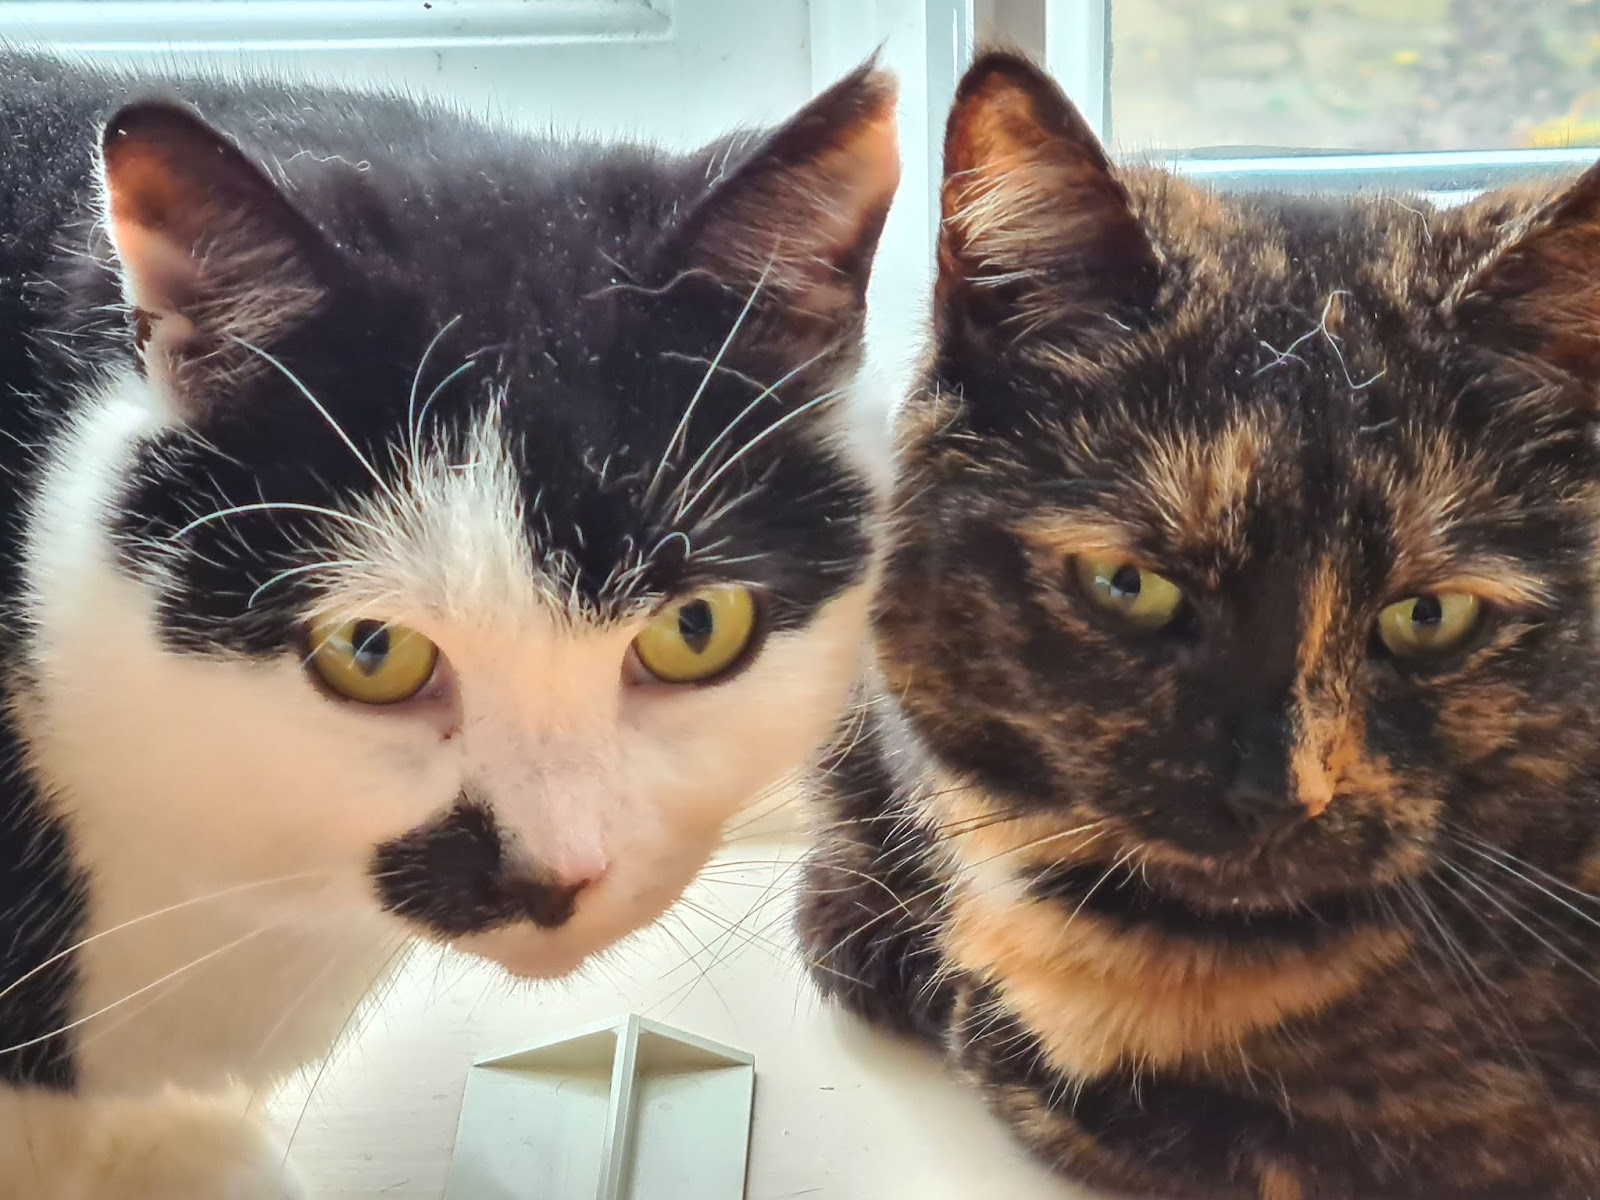 RSPCA rescue cats, Luke and Leia.